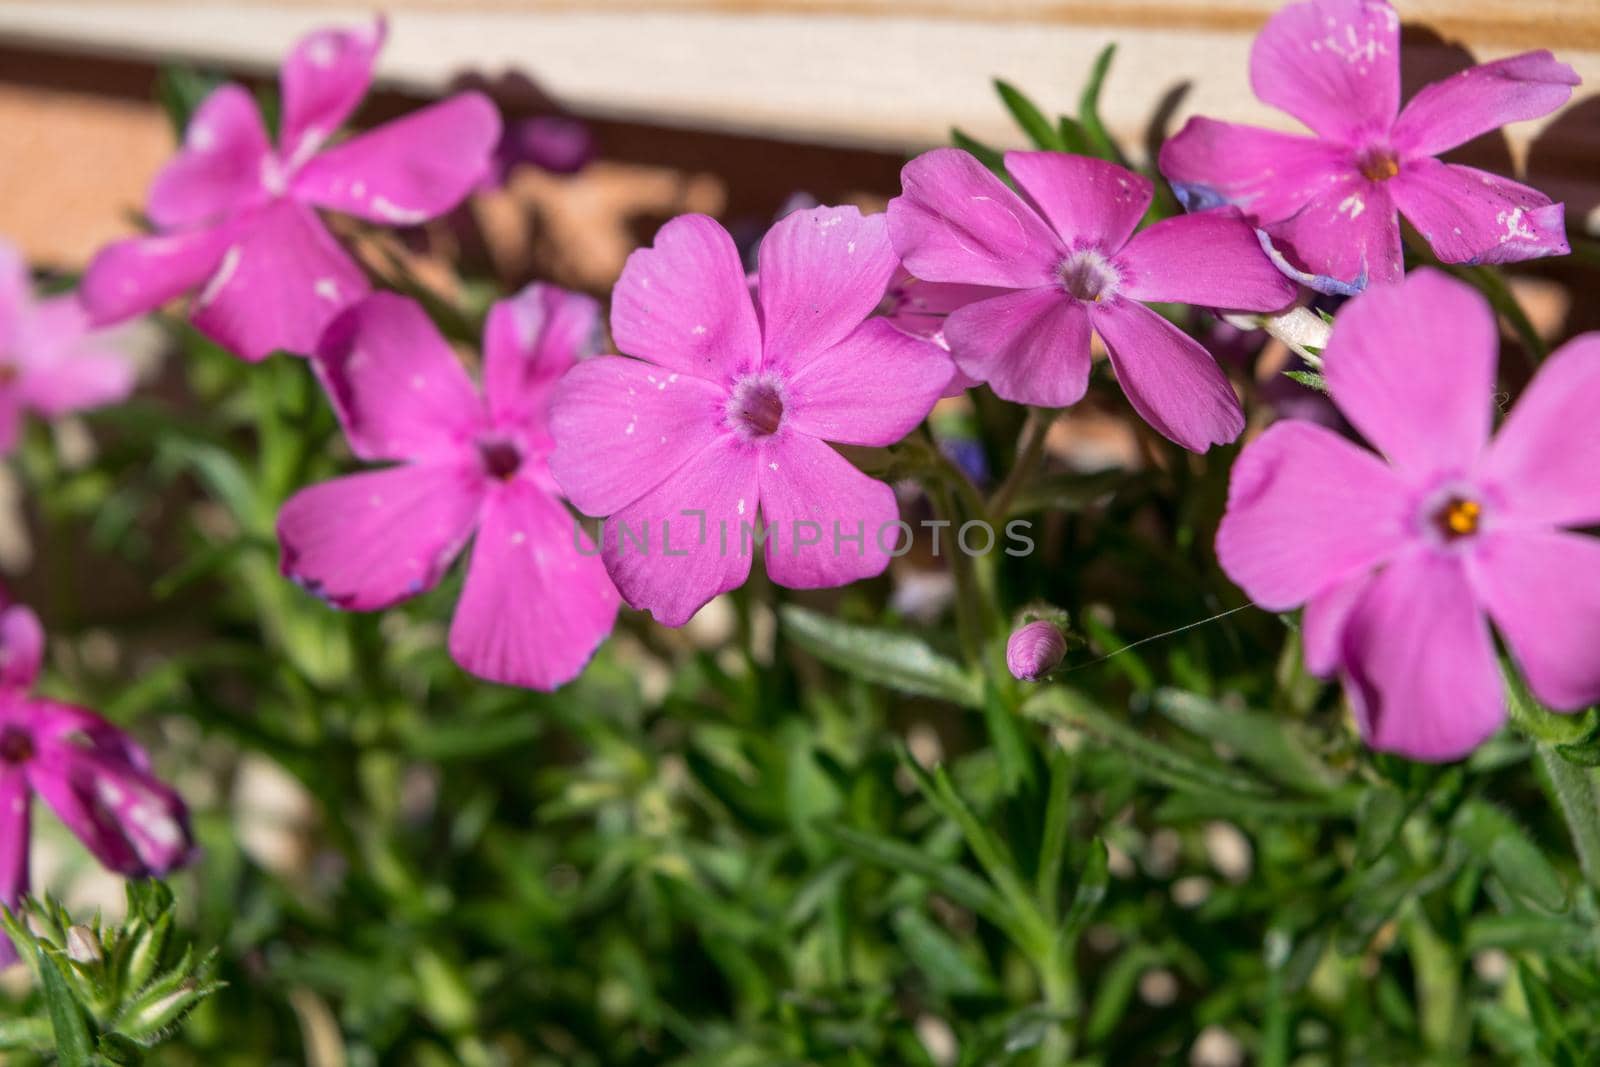 Close-up of a wonderful plant of Phlox paniculata by silentstock639